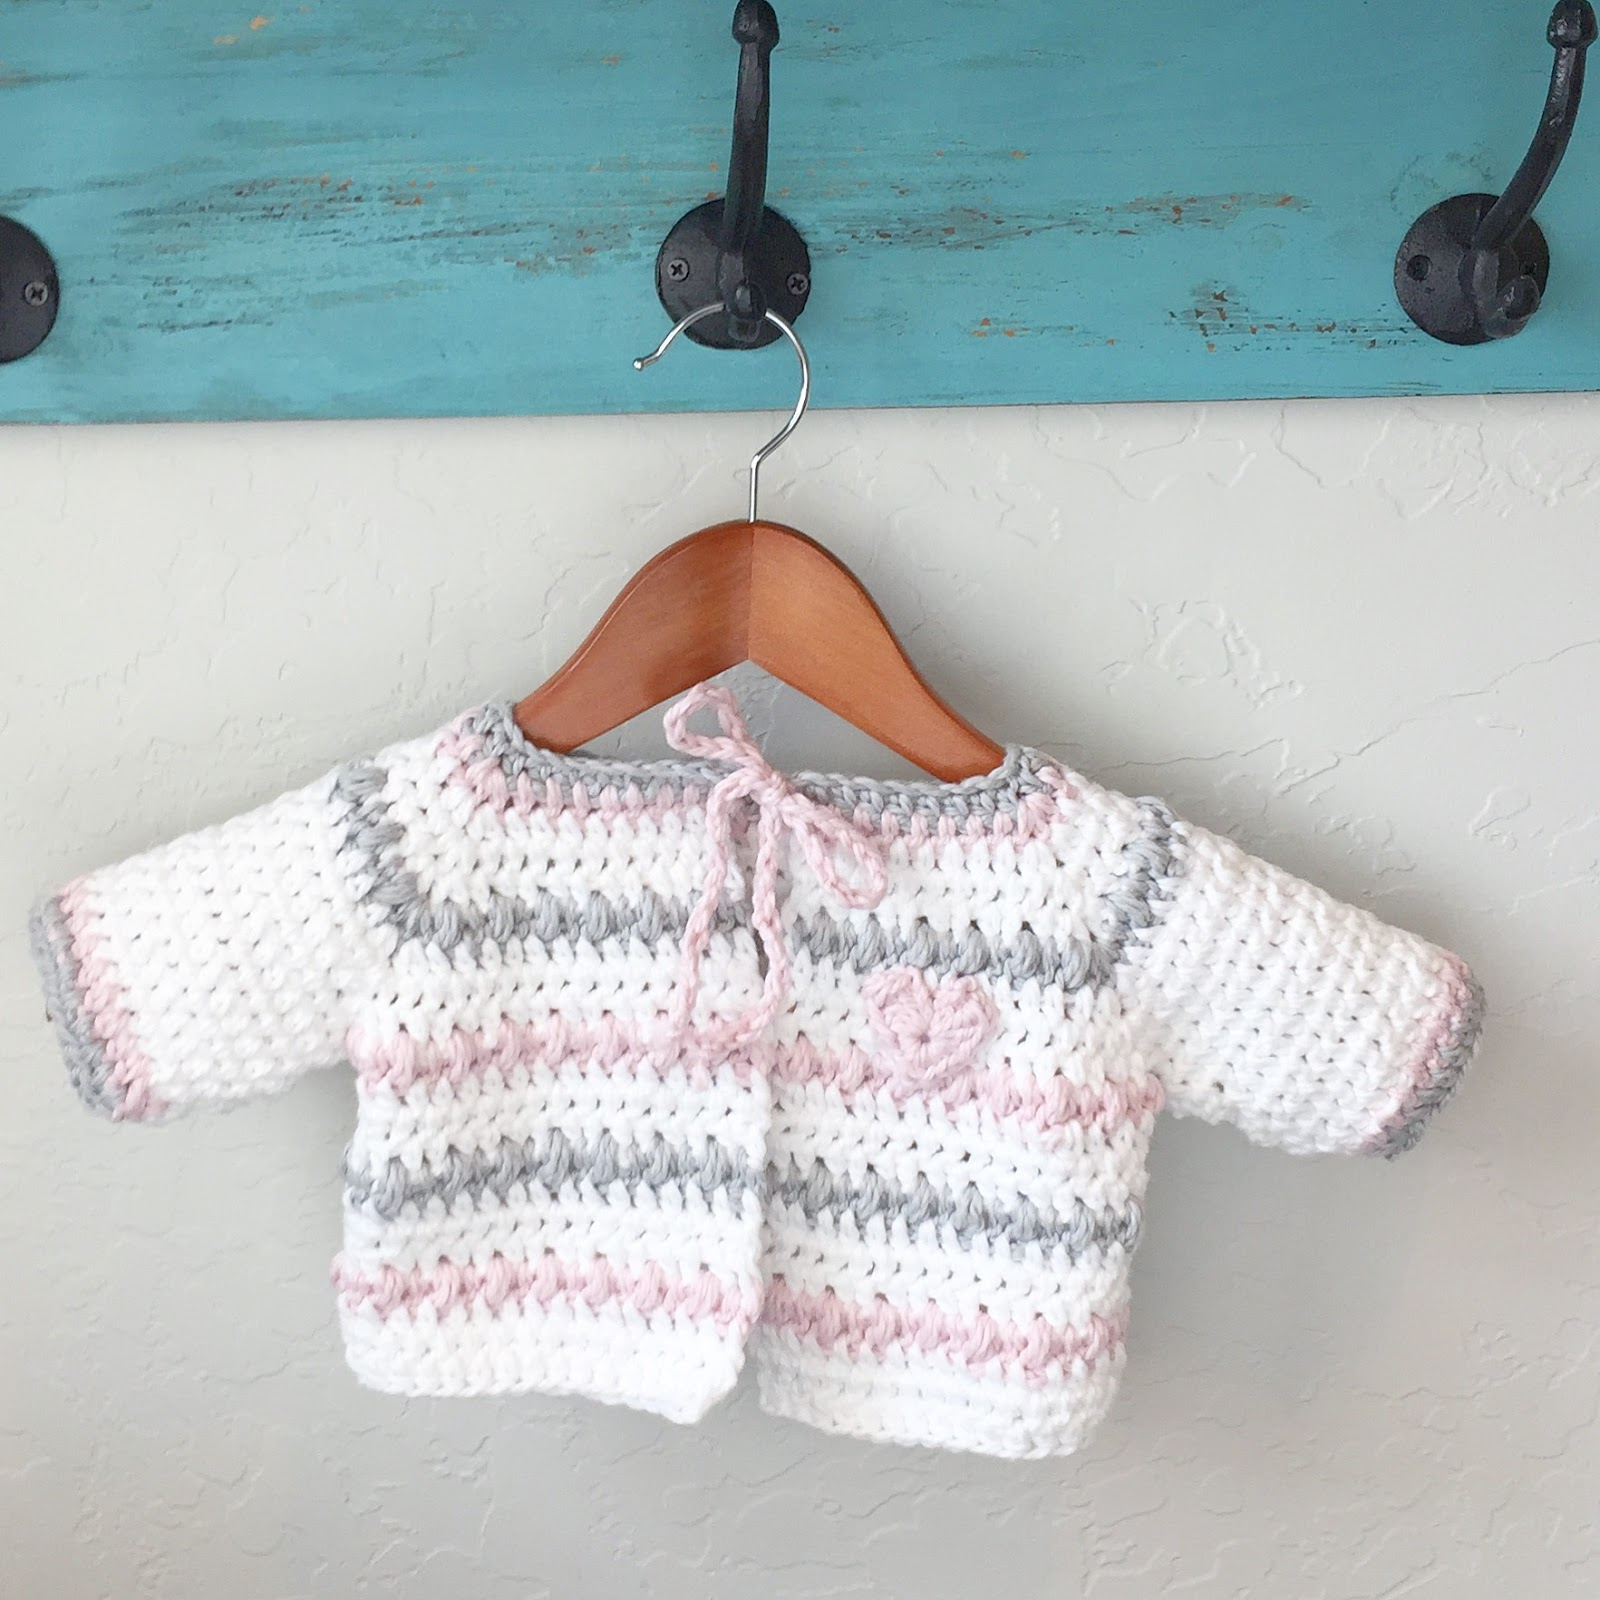 Crochet Baby Sweater Patterns Crochet Ba Sweater In White Pink And Gray Daisy Farm Crafts